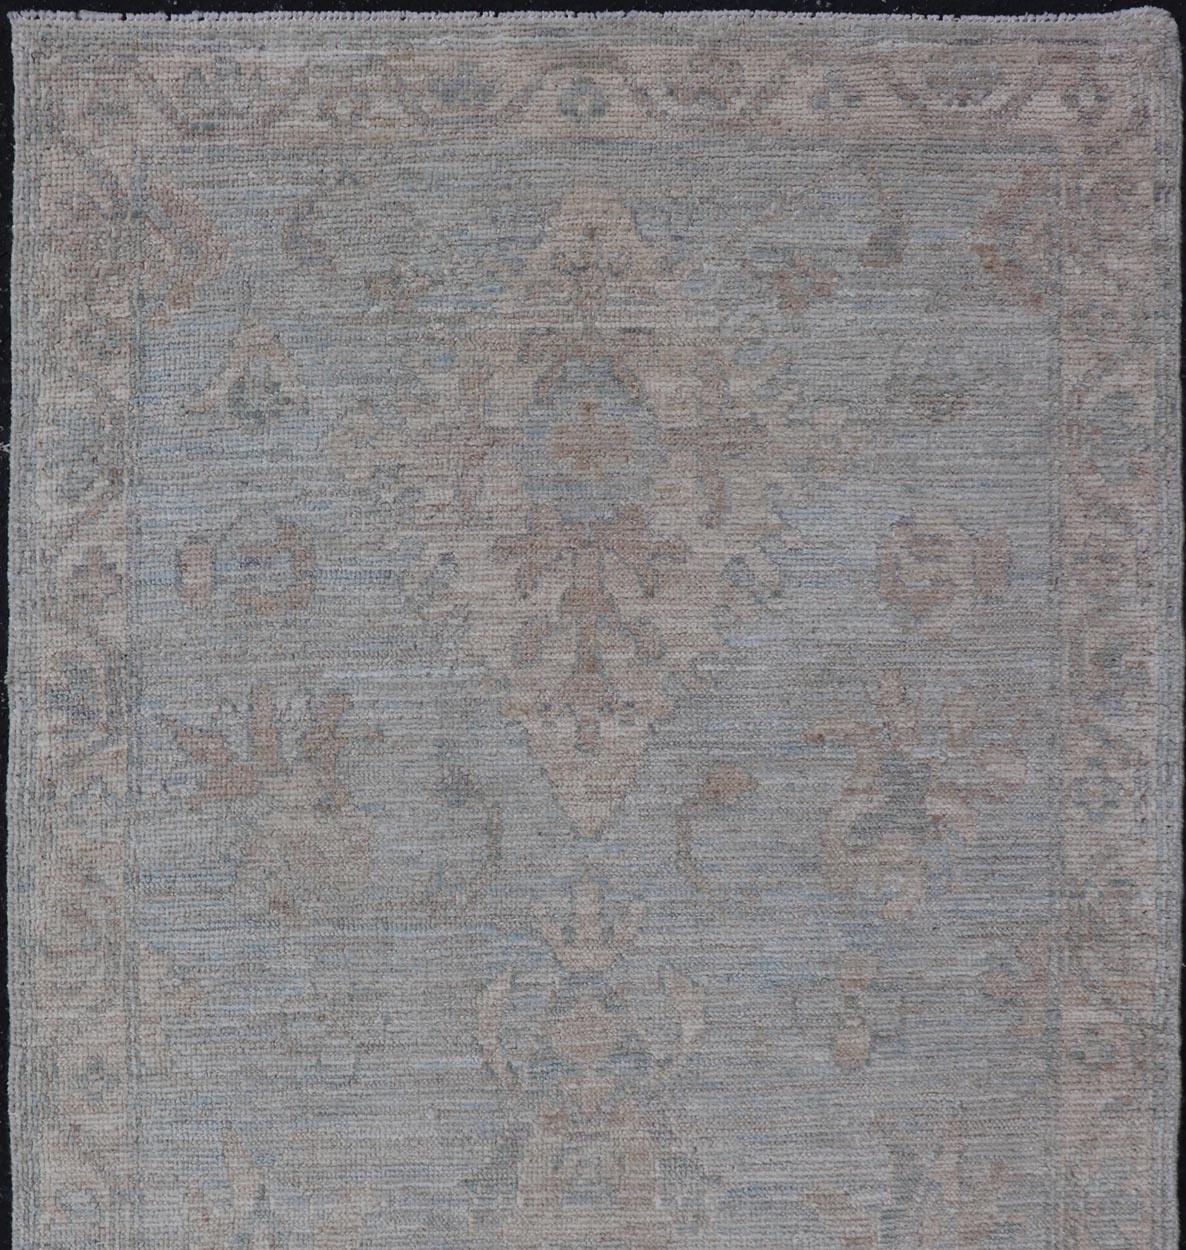 Afghan Modern Oushak Rug in All-Over Floral Motifs in Light Blue-Gray and Creams For Sale